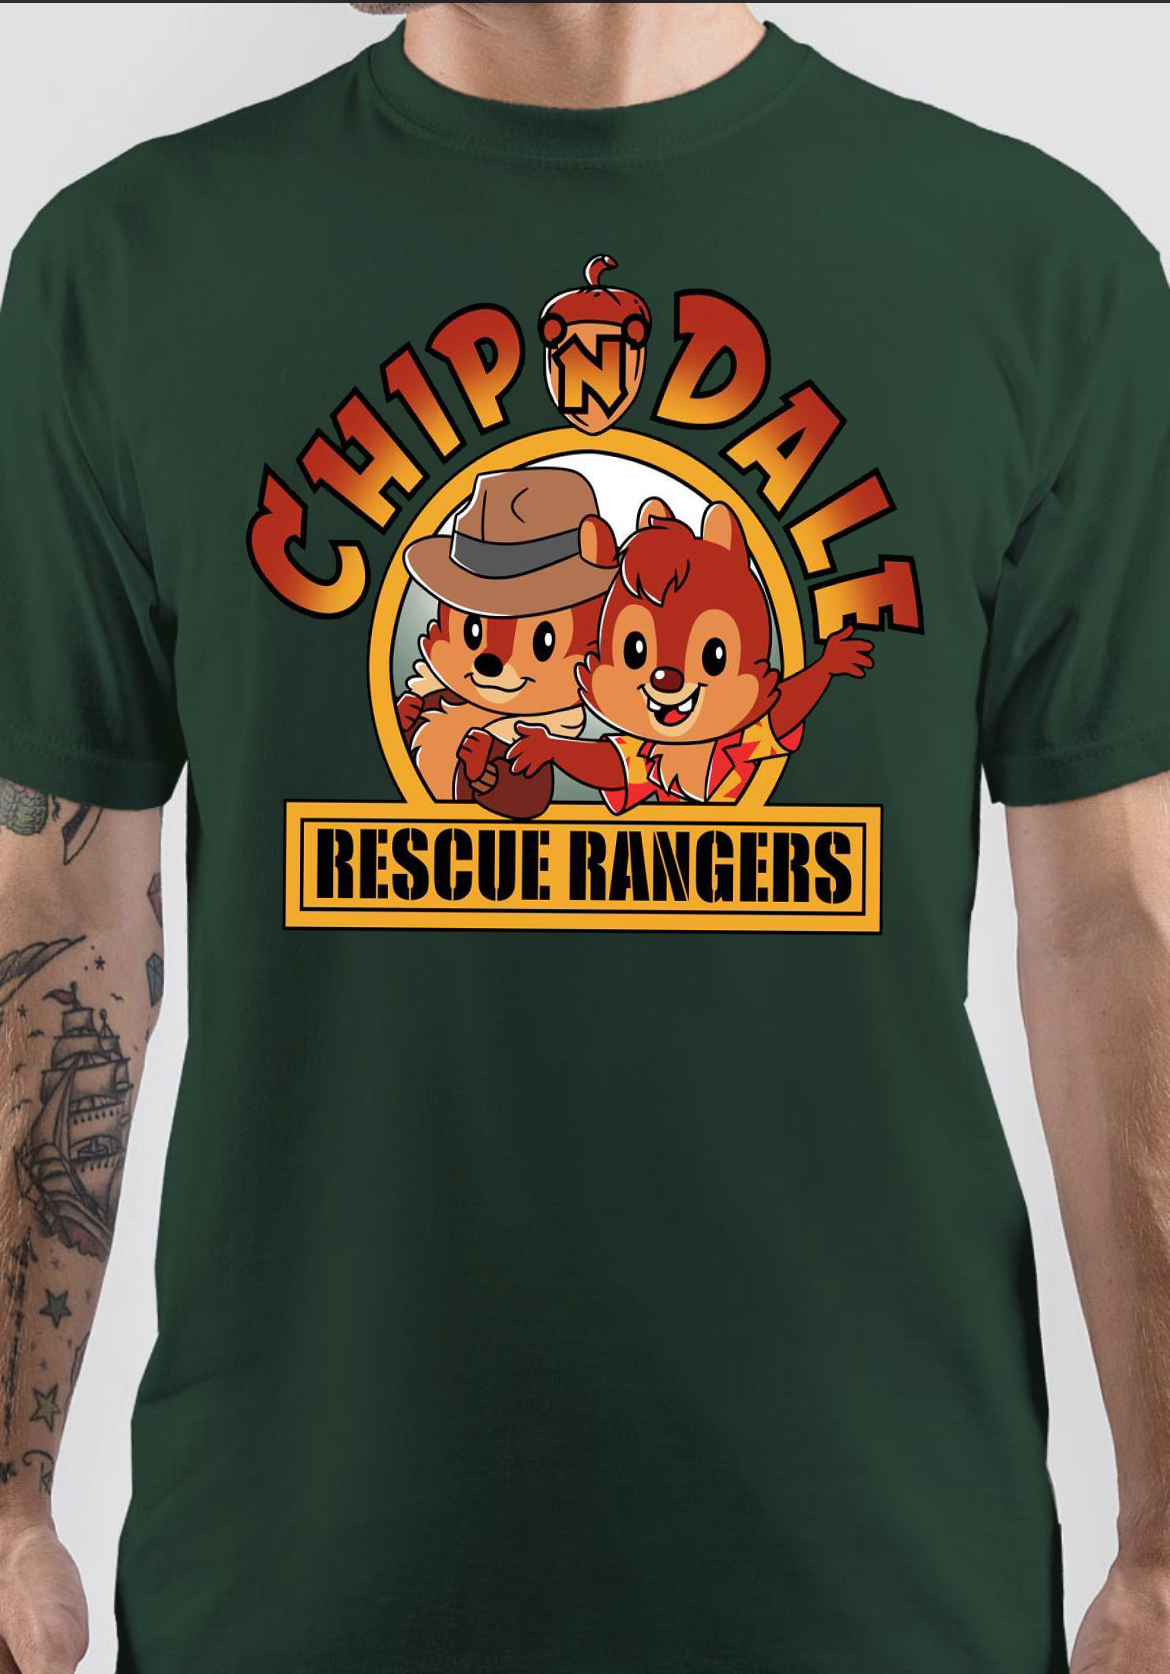 Chip 'n Dale: Rescue Ranger T-Shirt And Merchandise